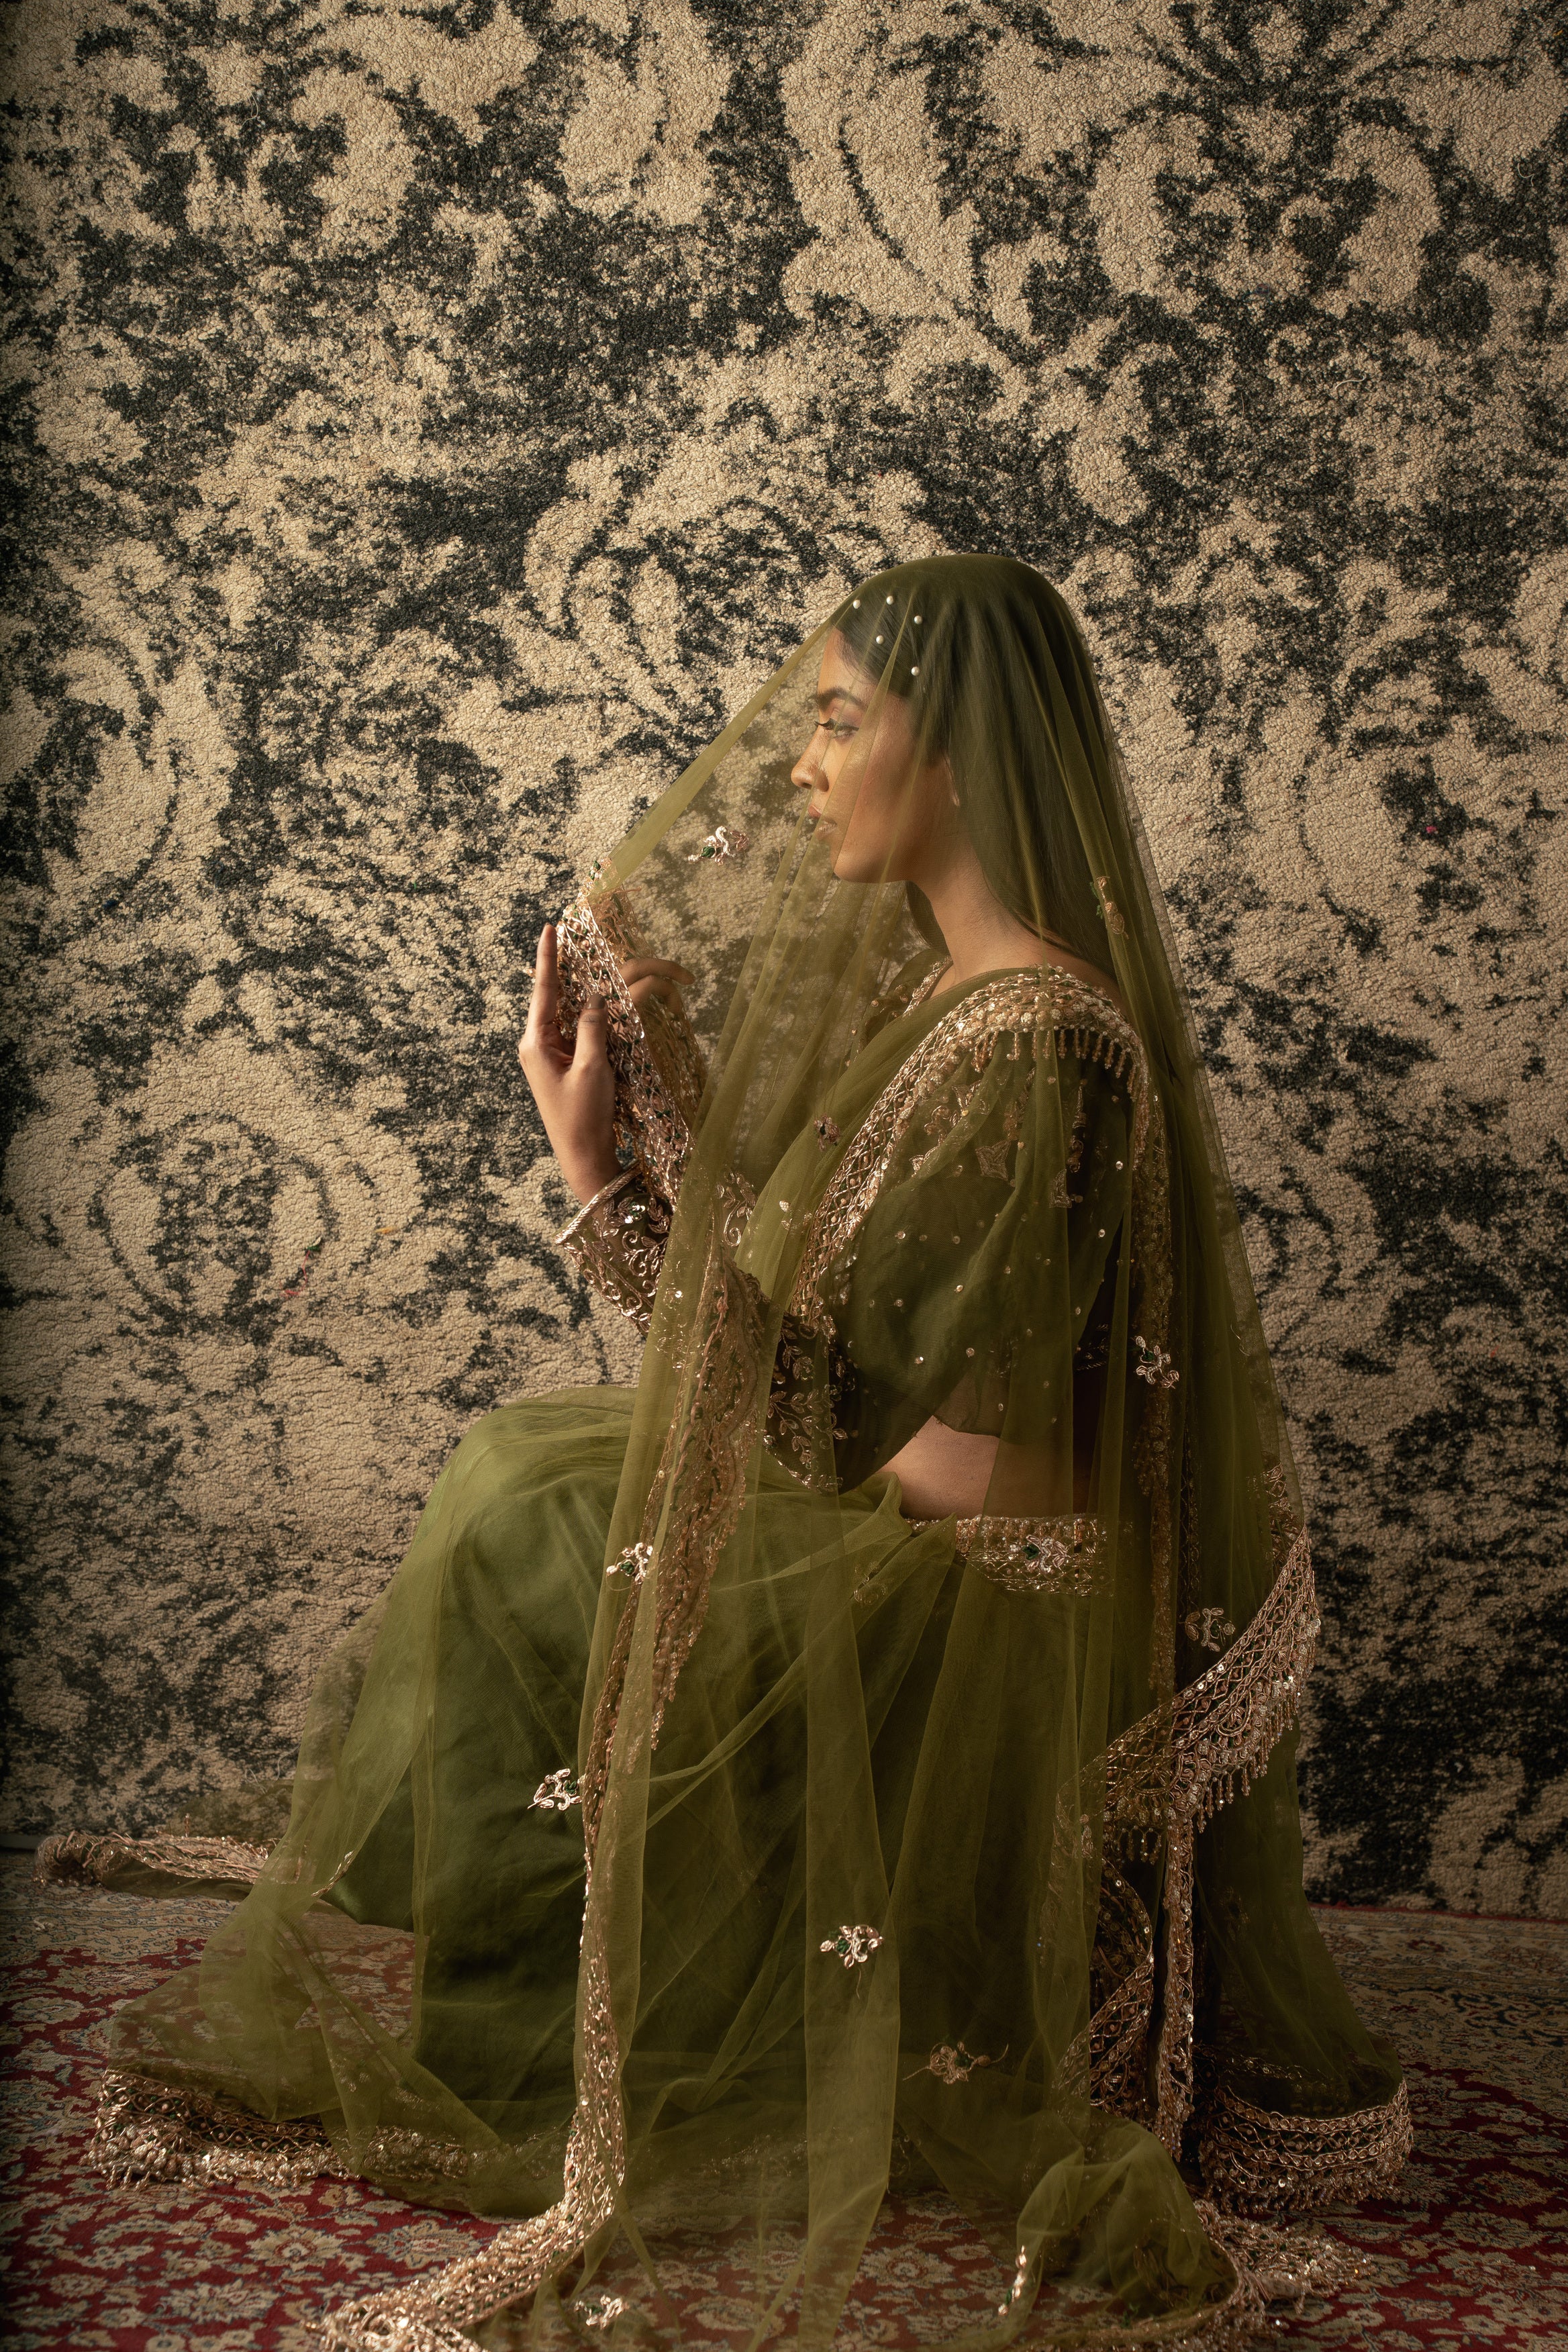 Enchanting in Olive Green: Net Saree paired with a Velvet and Organza blouse, a captivating ensemble that exudes timeless elegance.